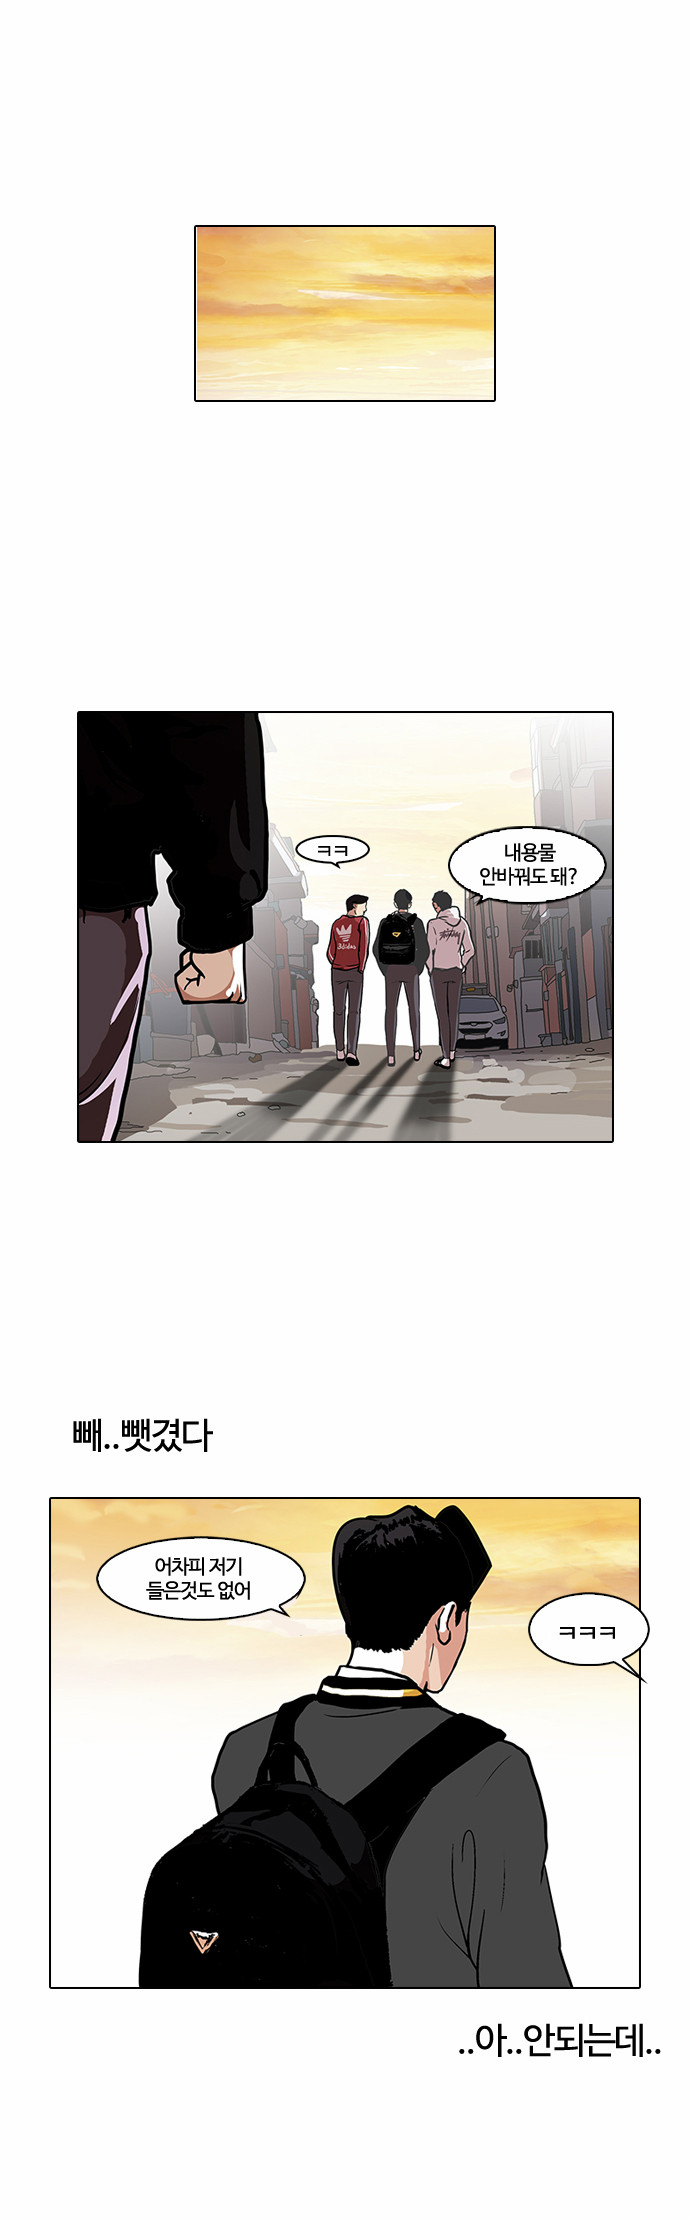 Lookism - Chapter 111 - Page 1